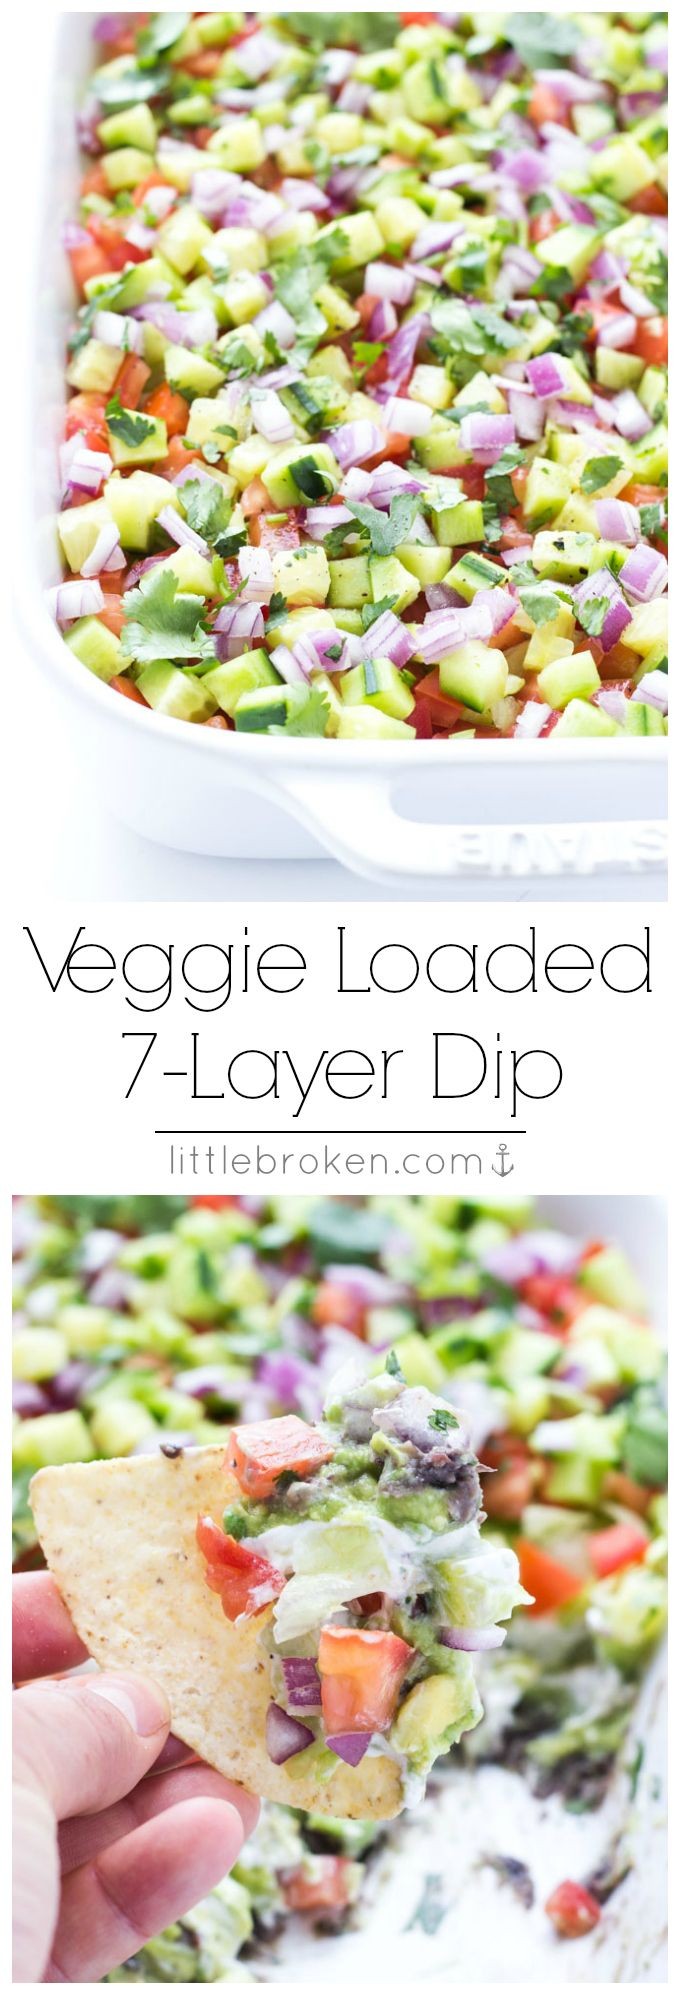 Healthy 7-layer appetizer without any processed ca...